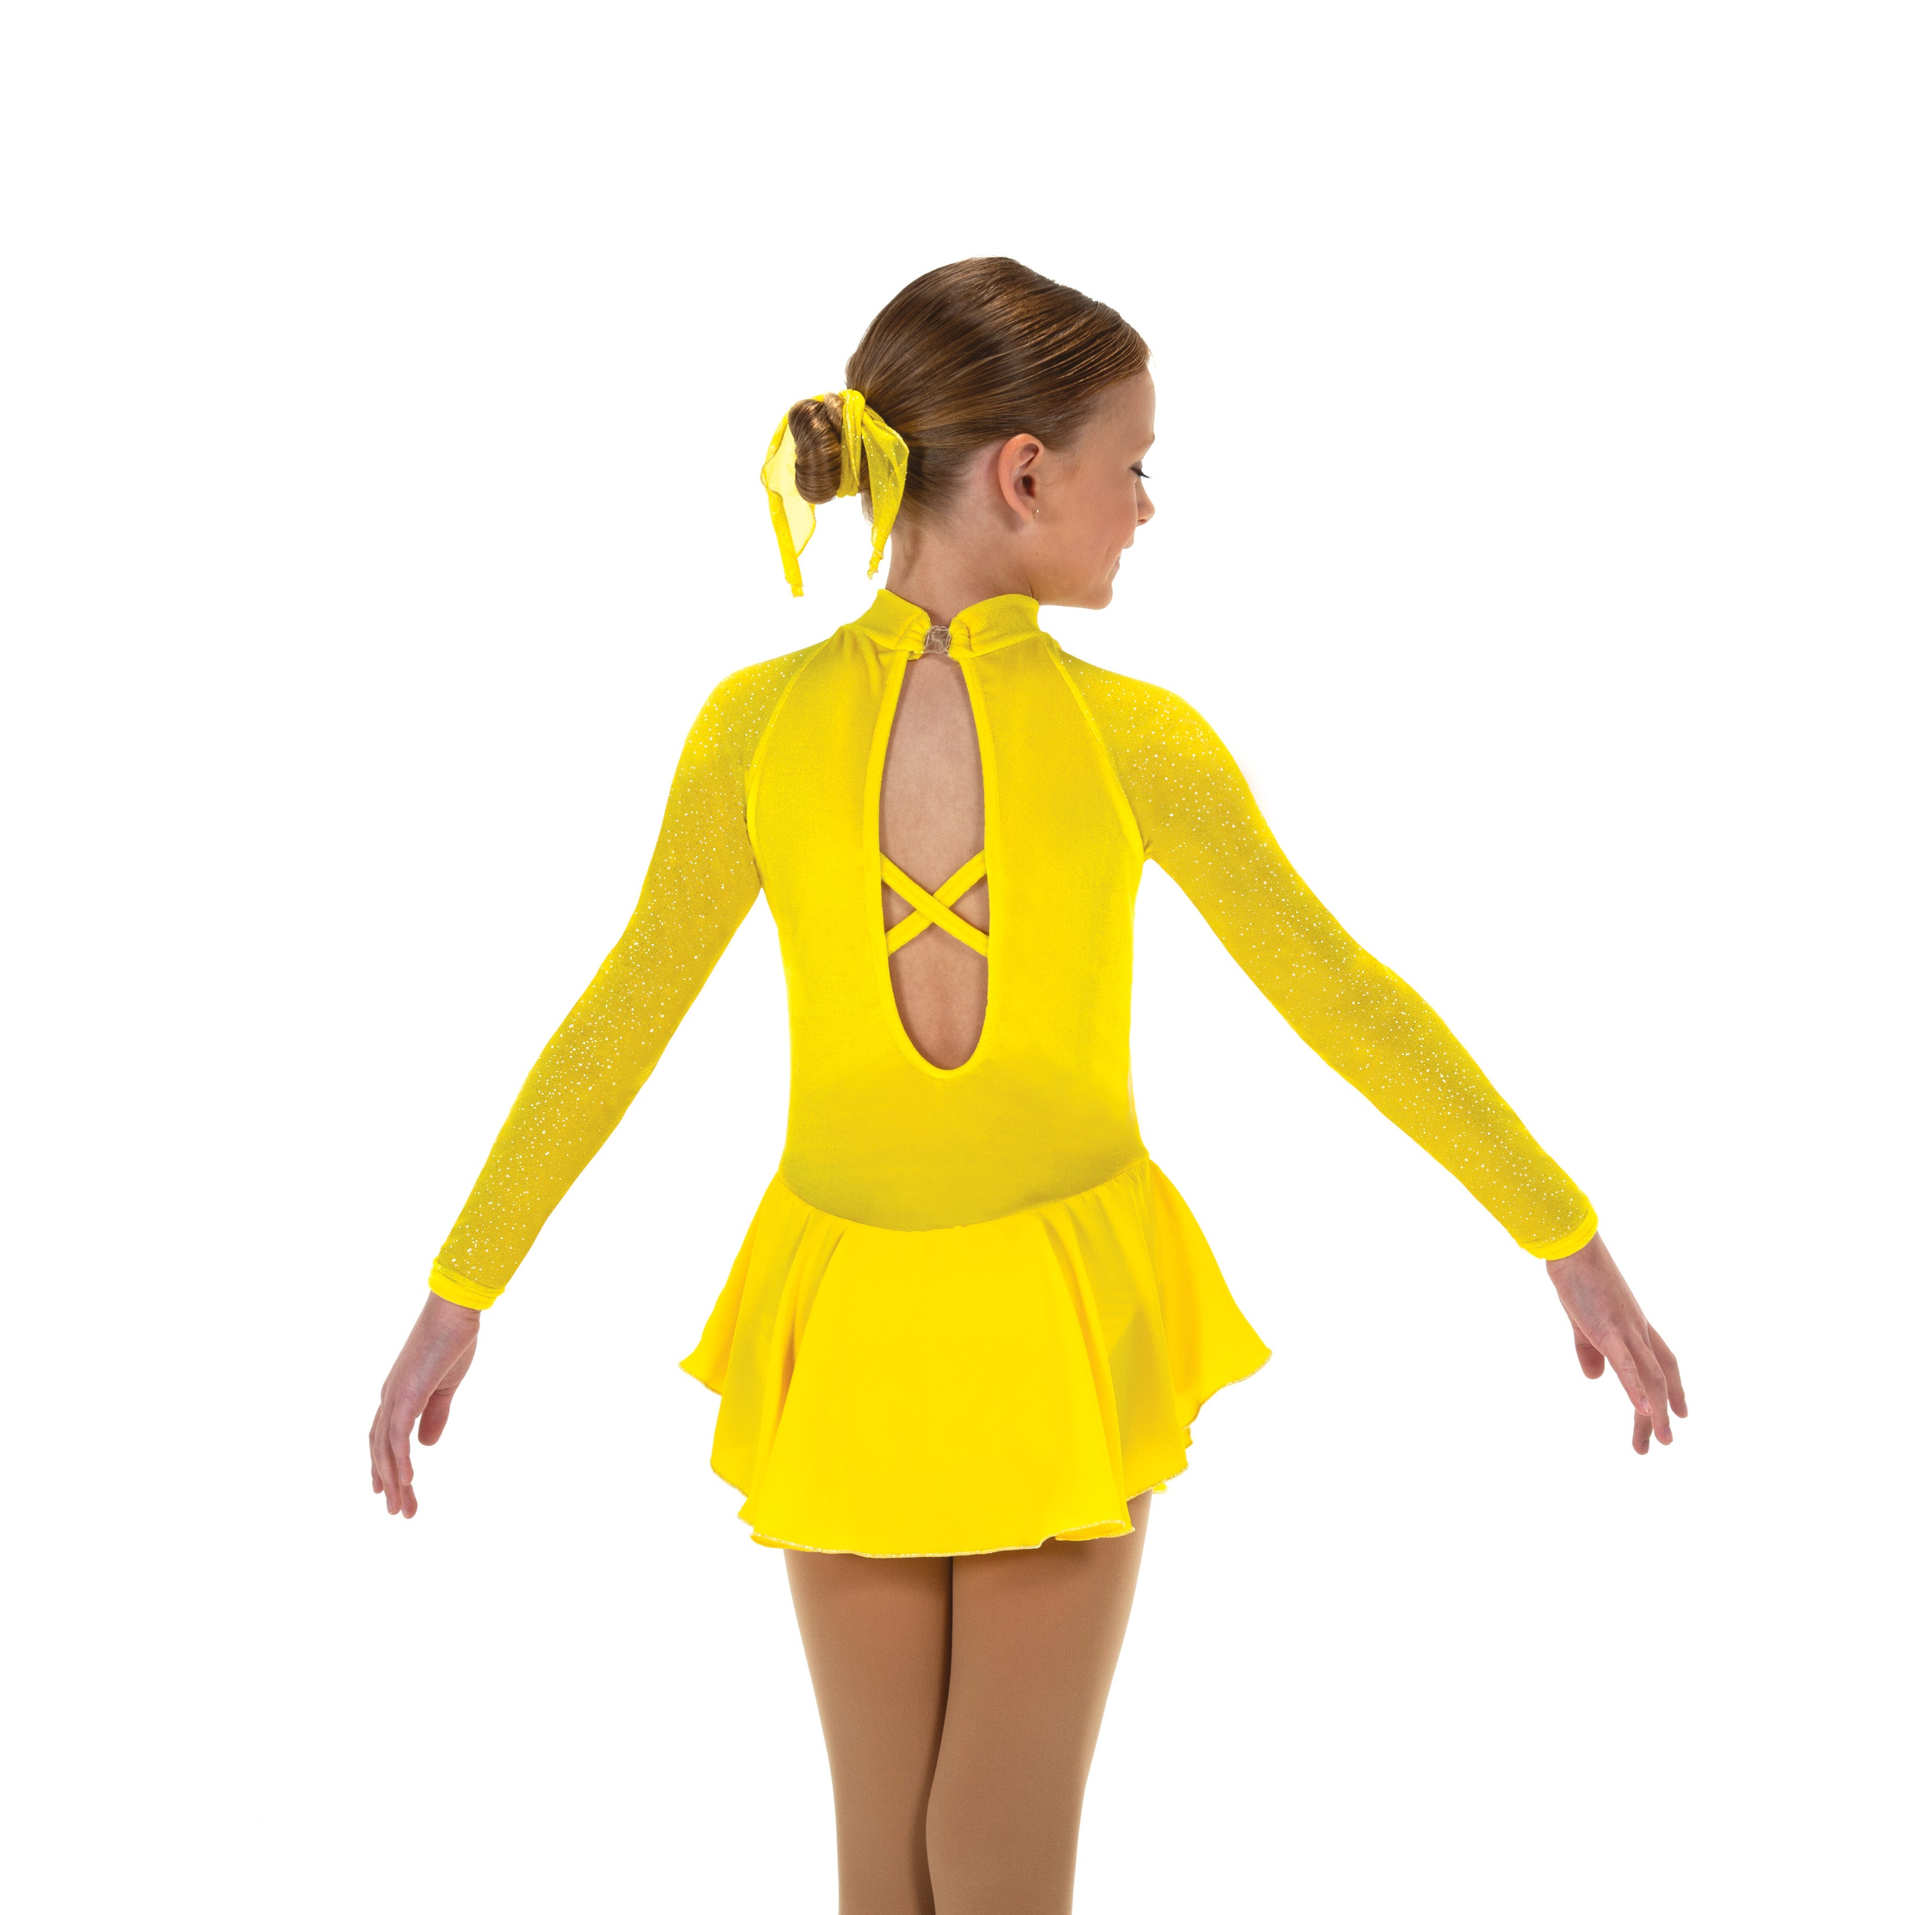 646 Starbrite Skating Dress in Yellow by Jerry's